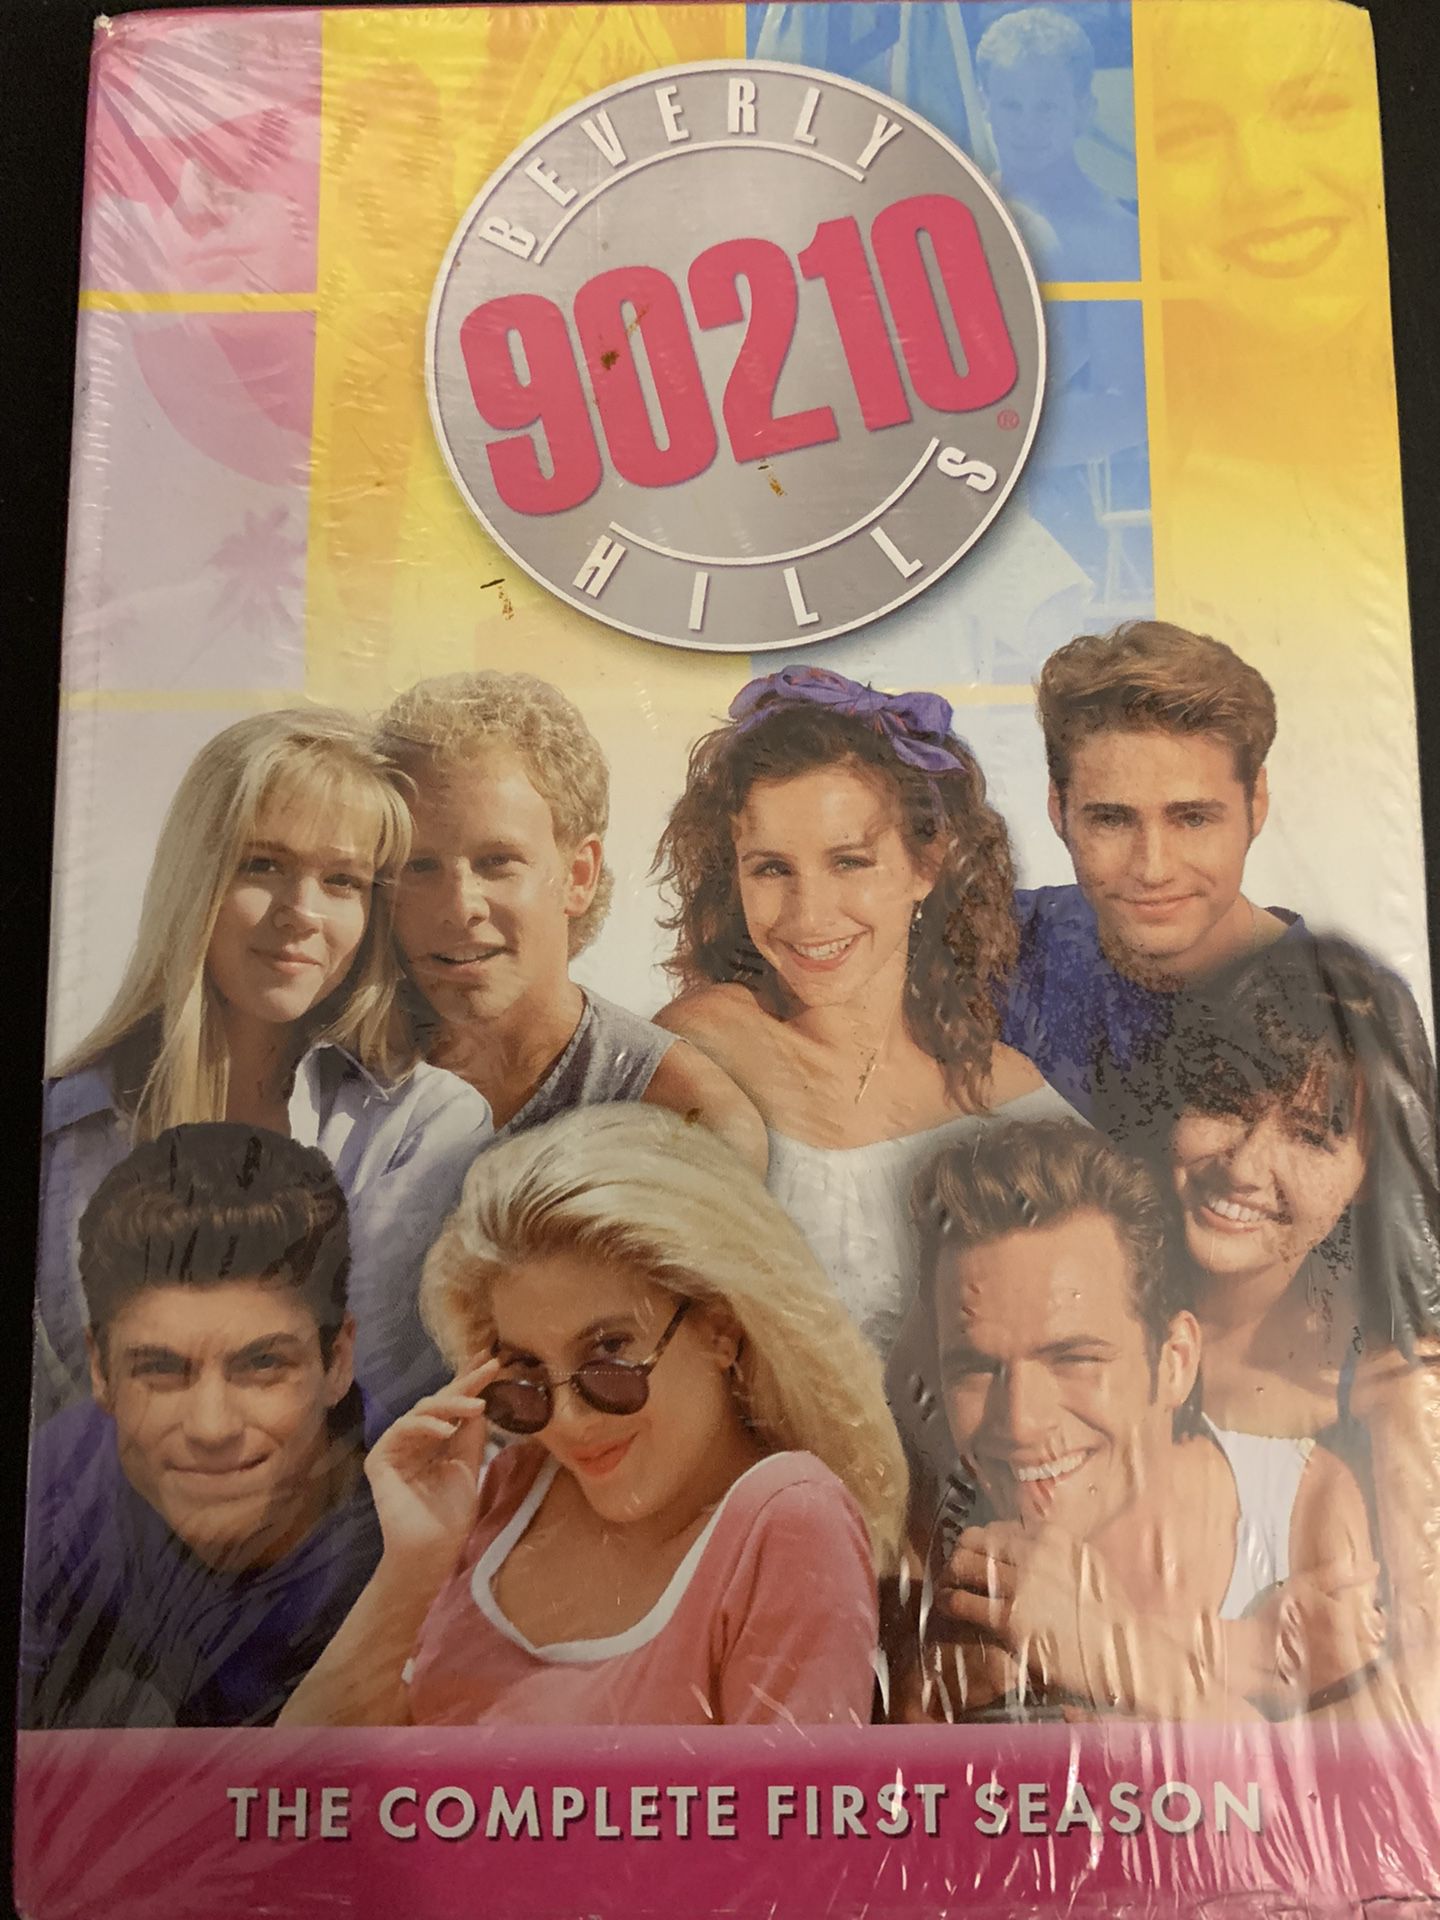 BEVERLY HILLS 90210 The Complete 1st Season (DVD) NEW$